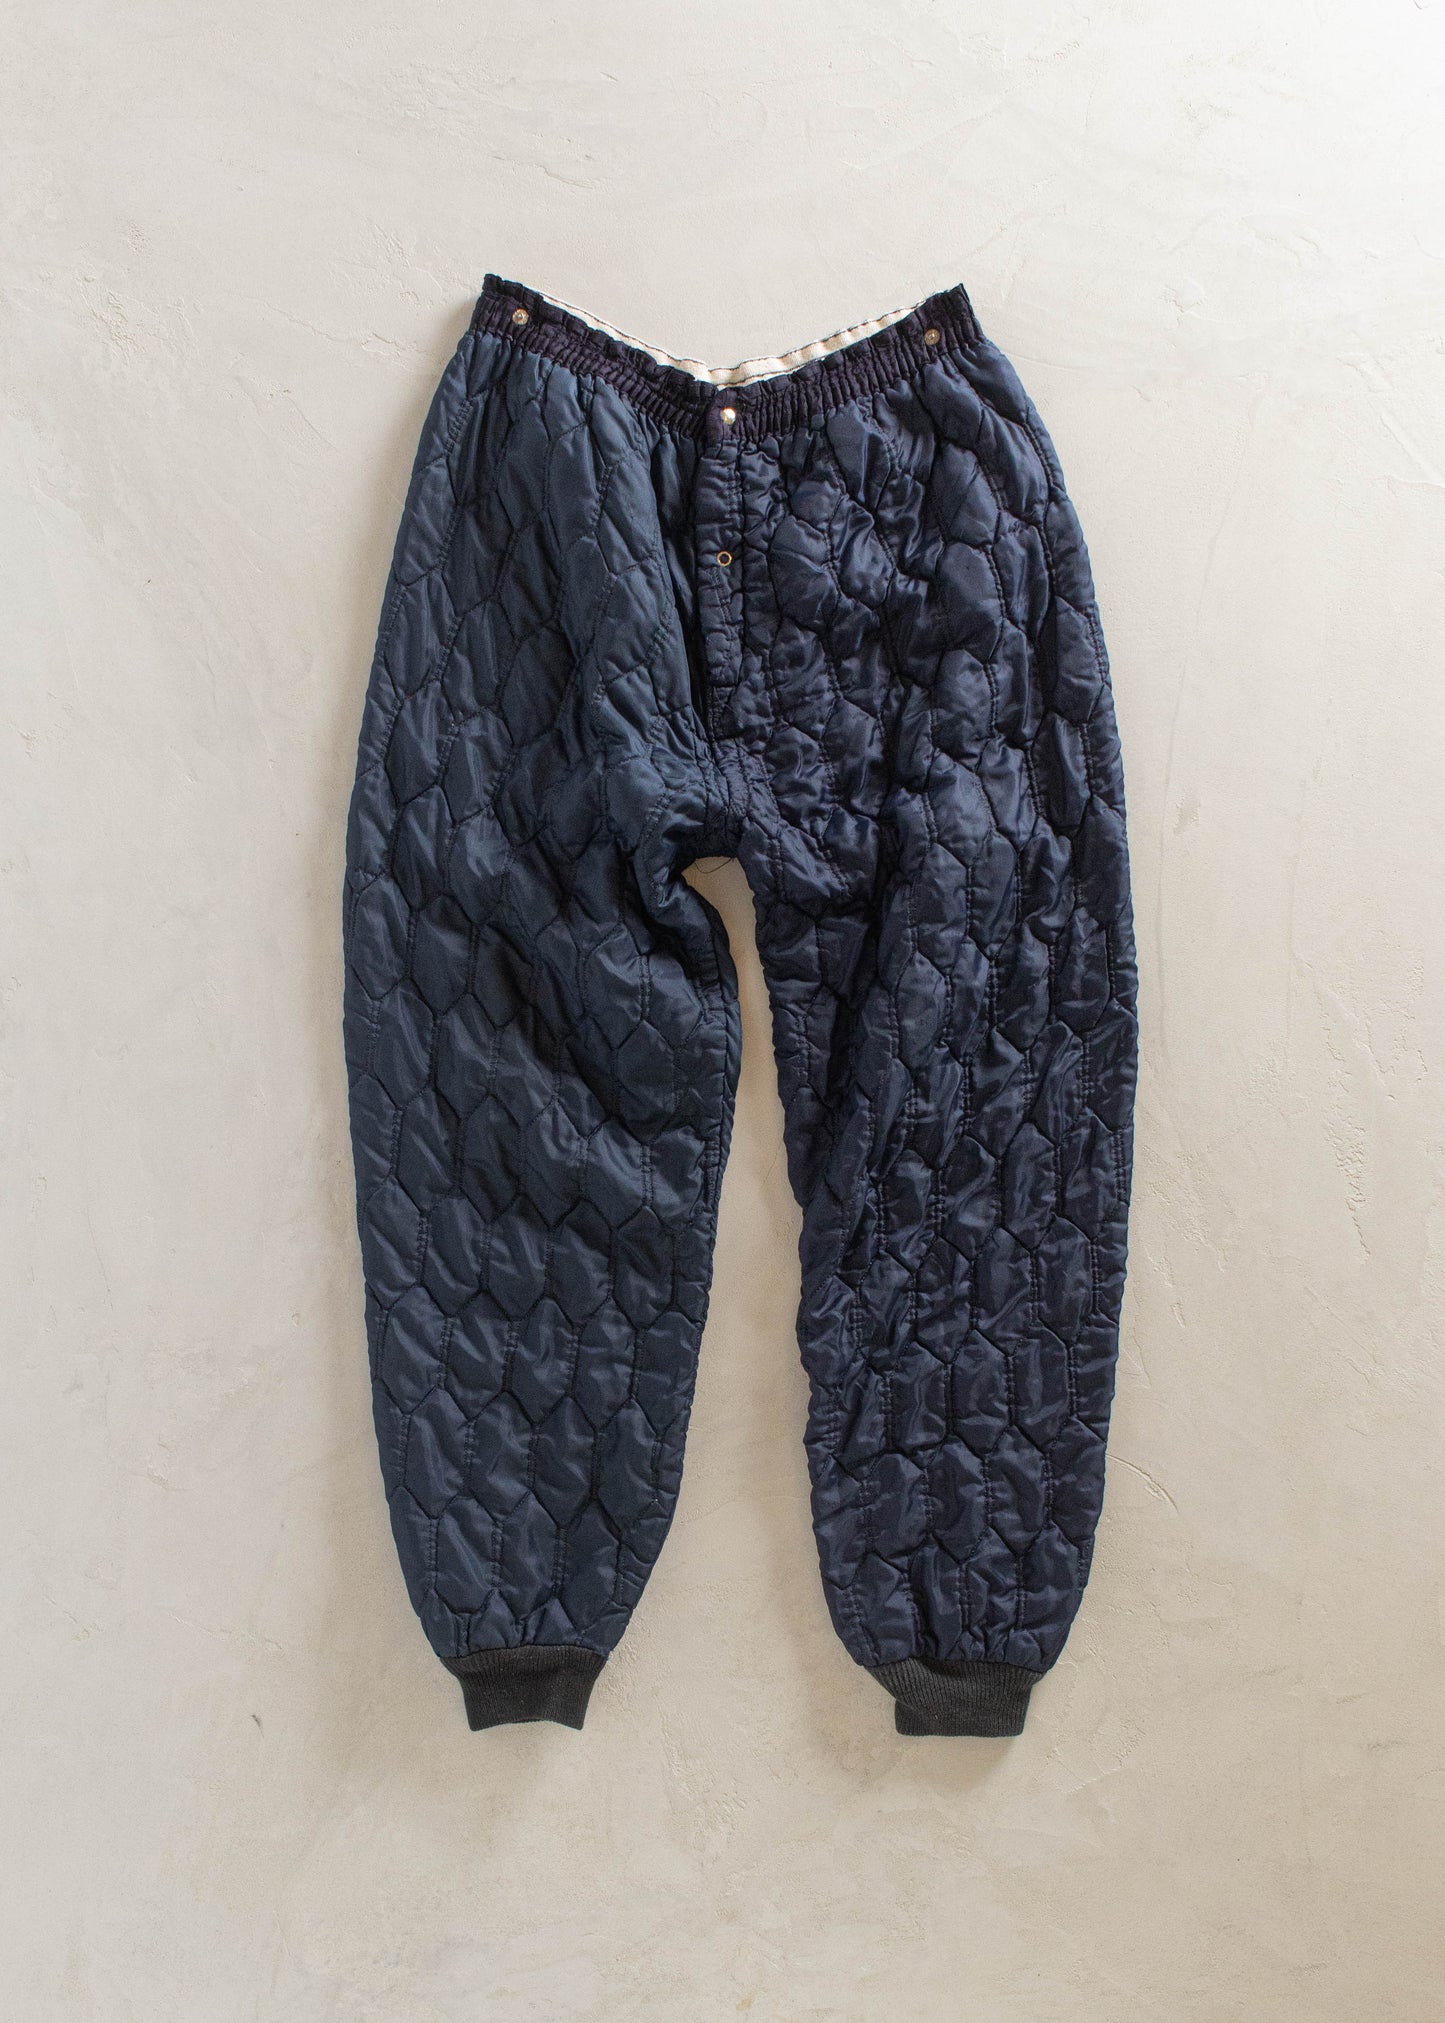 1980s Quilted Liner Pants Size M/L